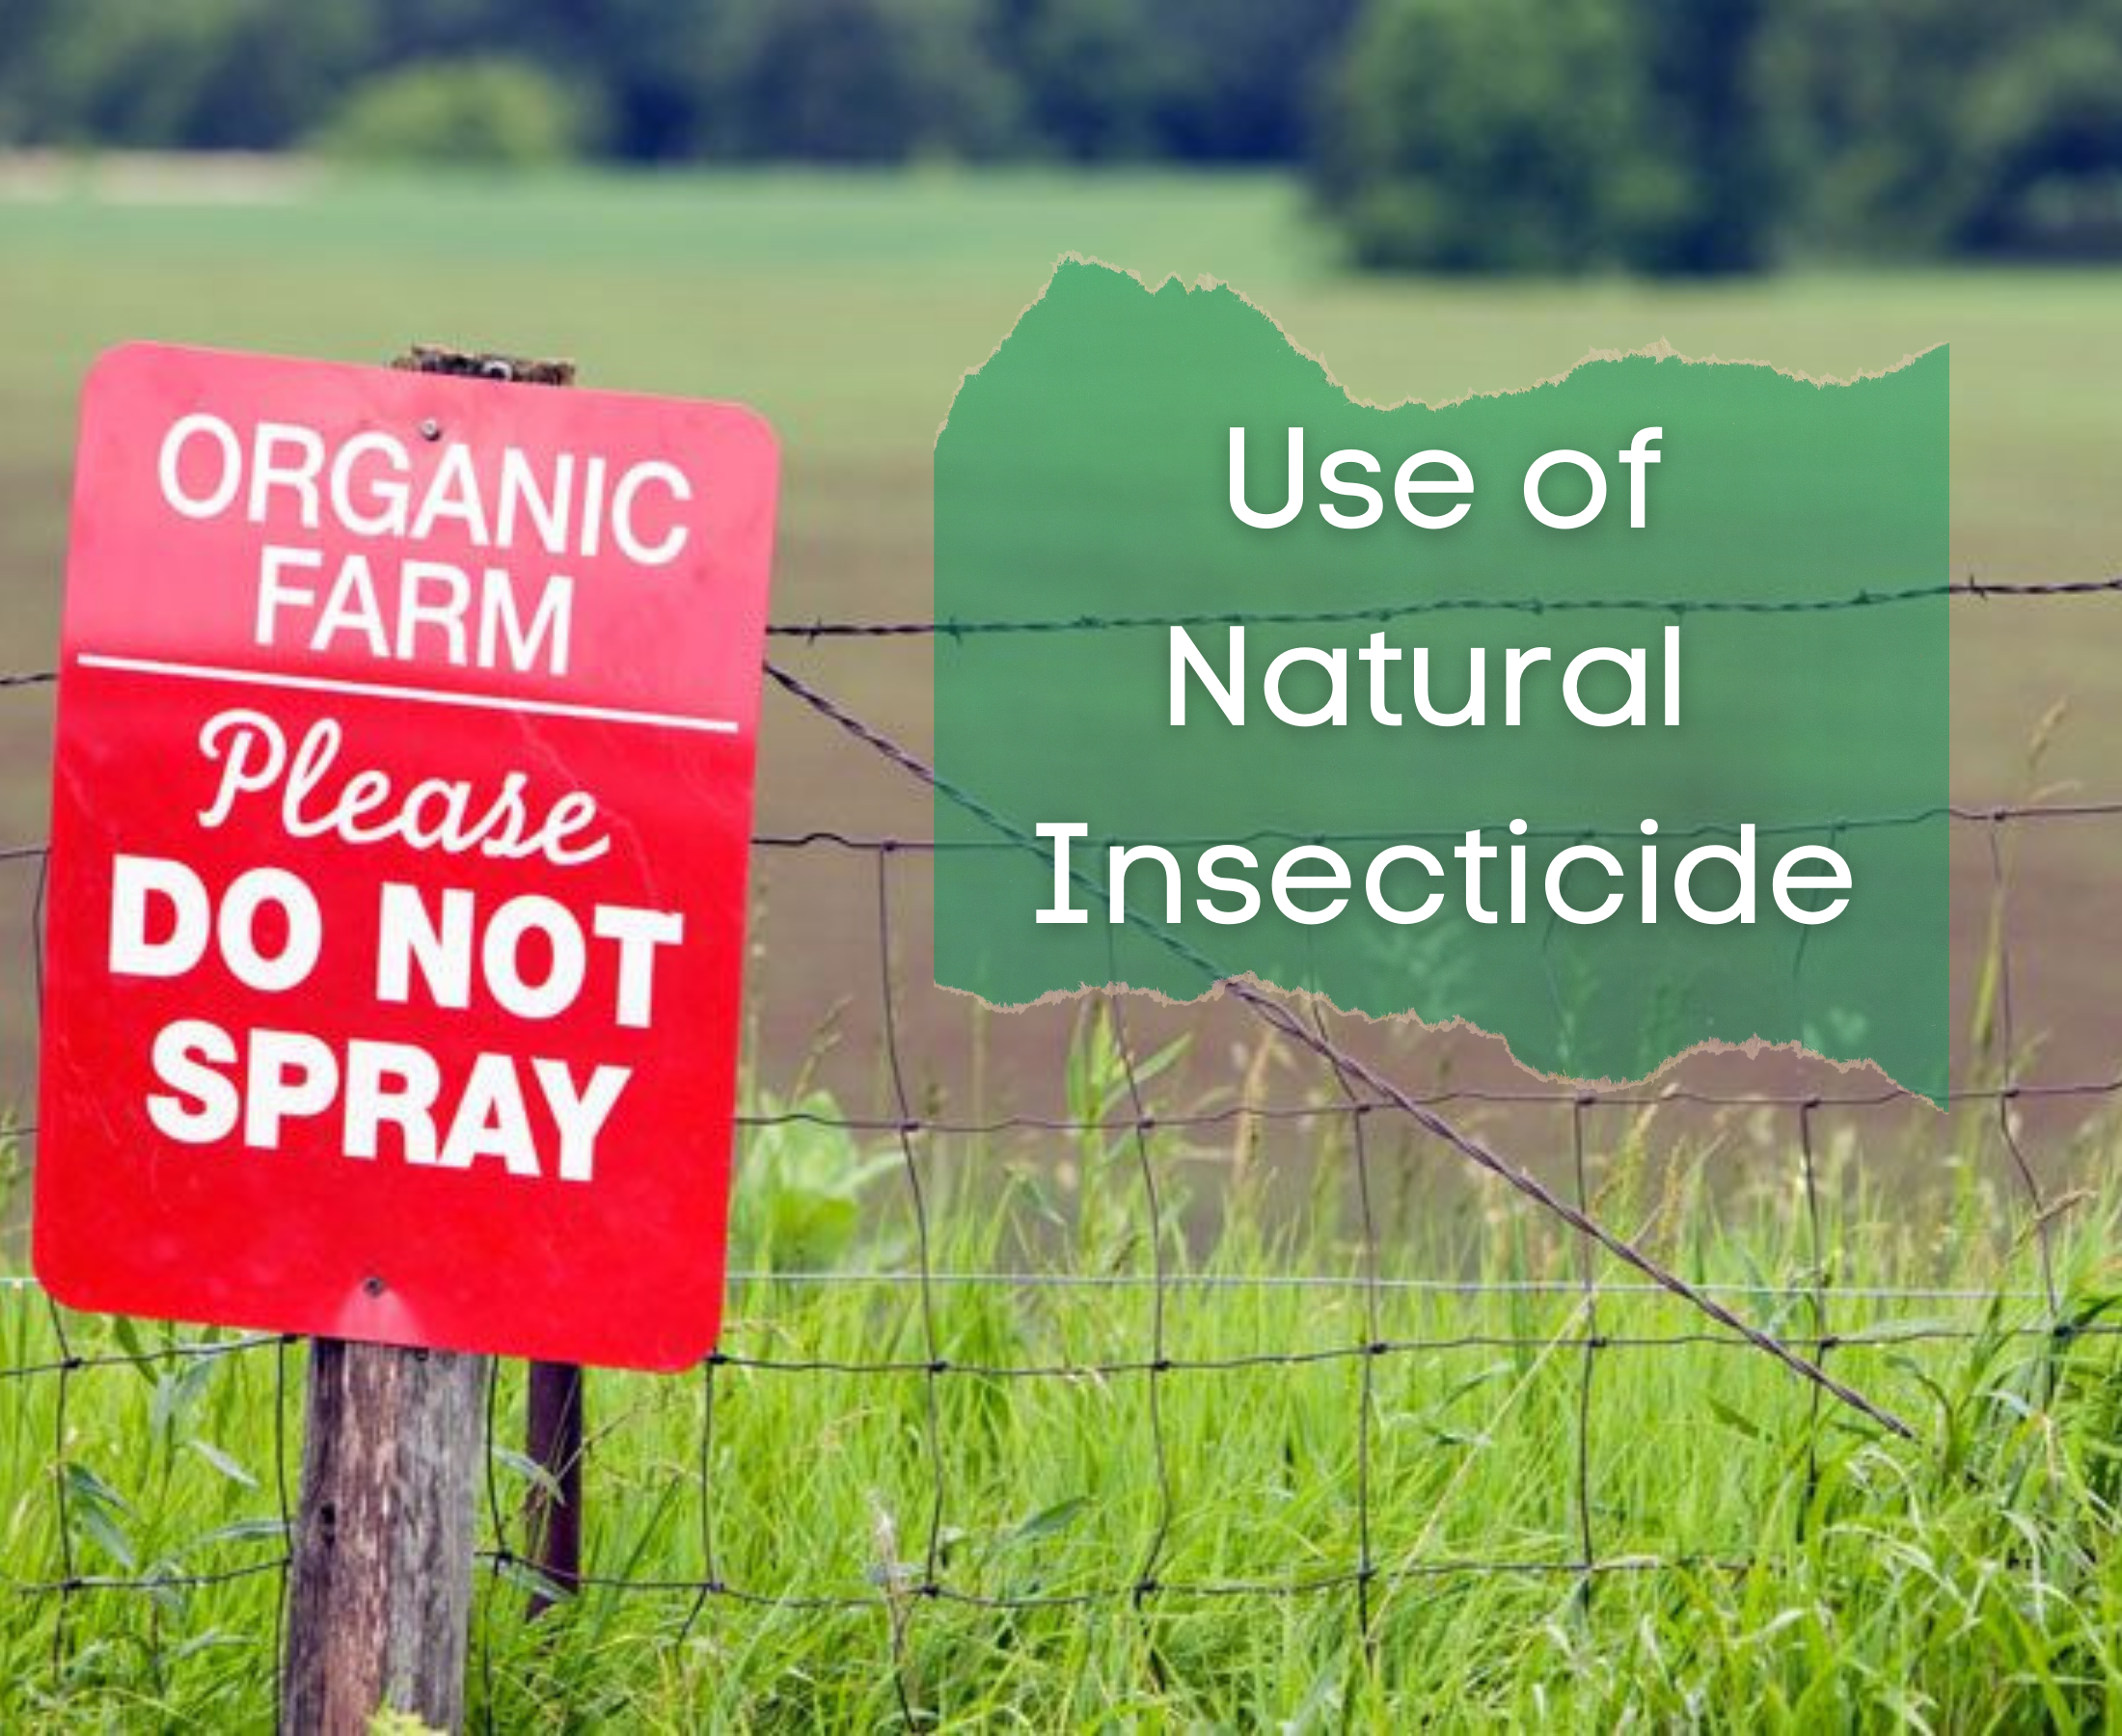 Which animals and plants are used as a natural insecticides?